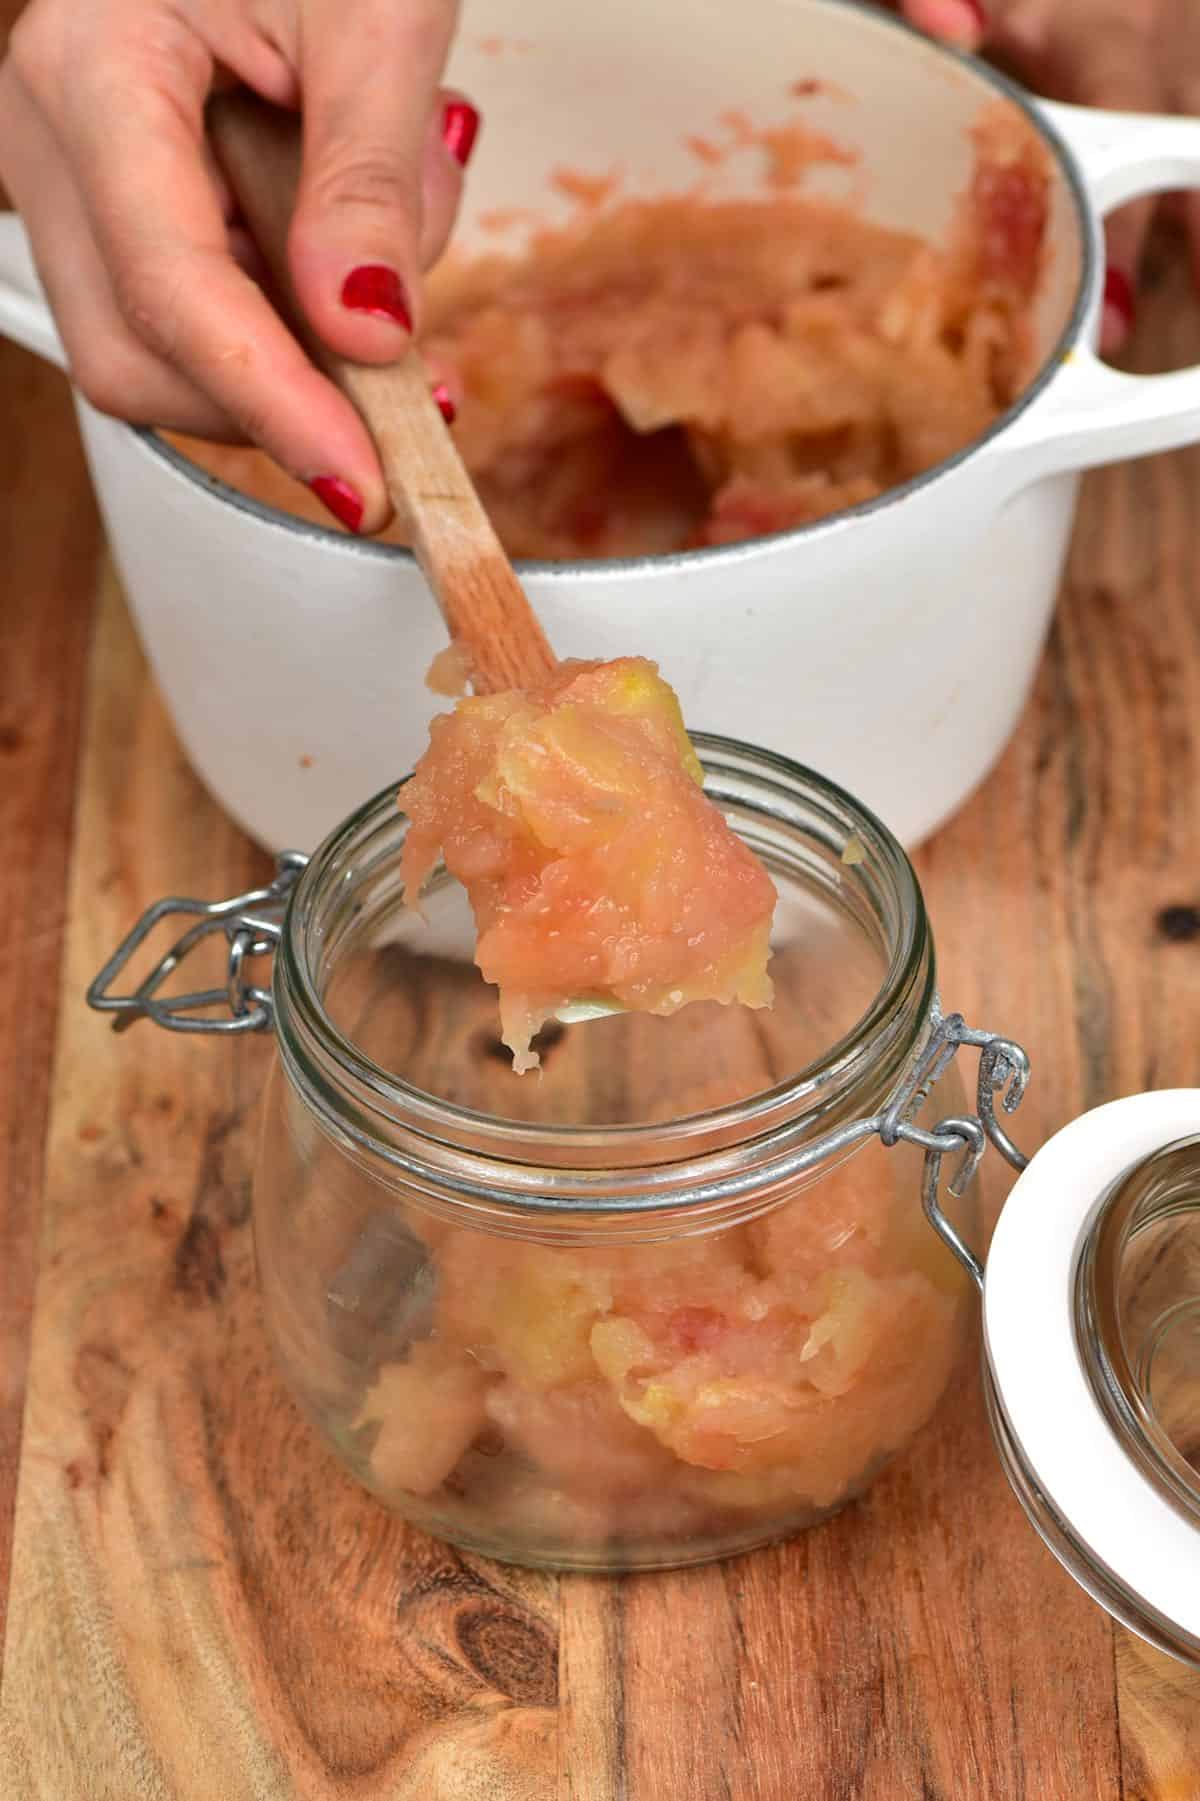 Filling a jar with Applesauce